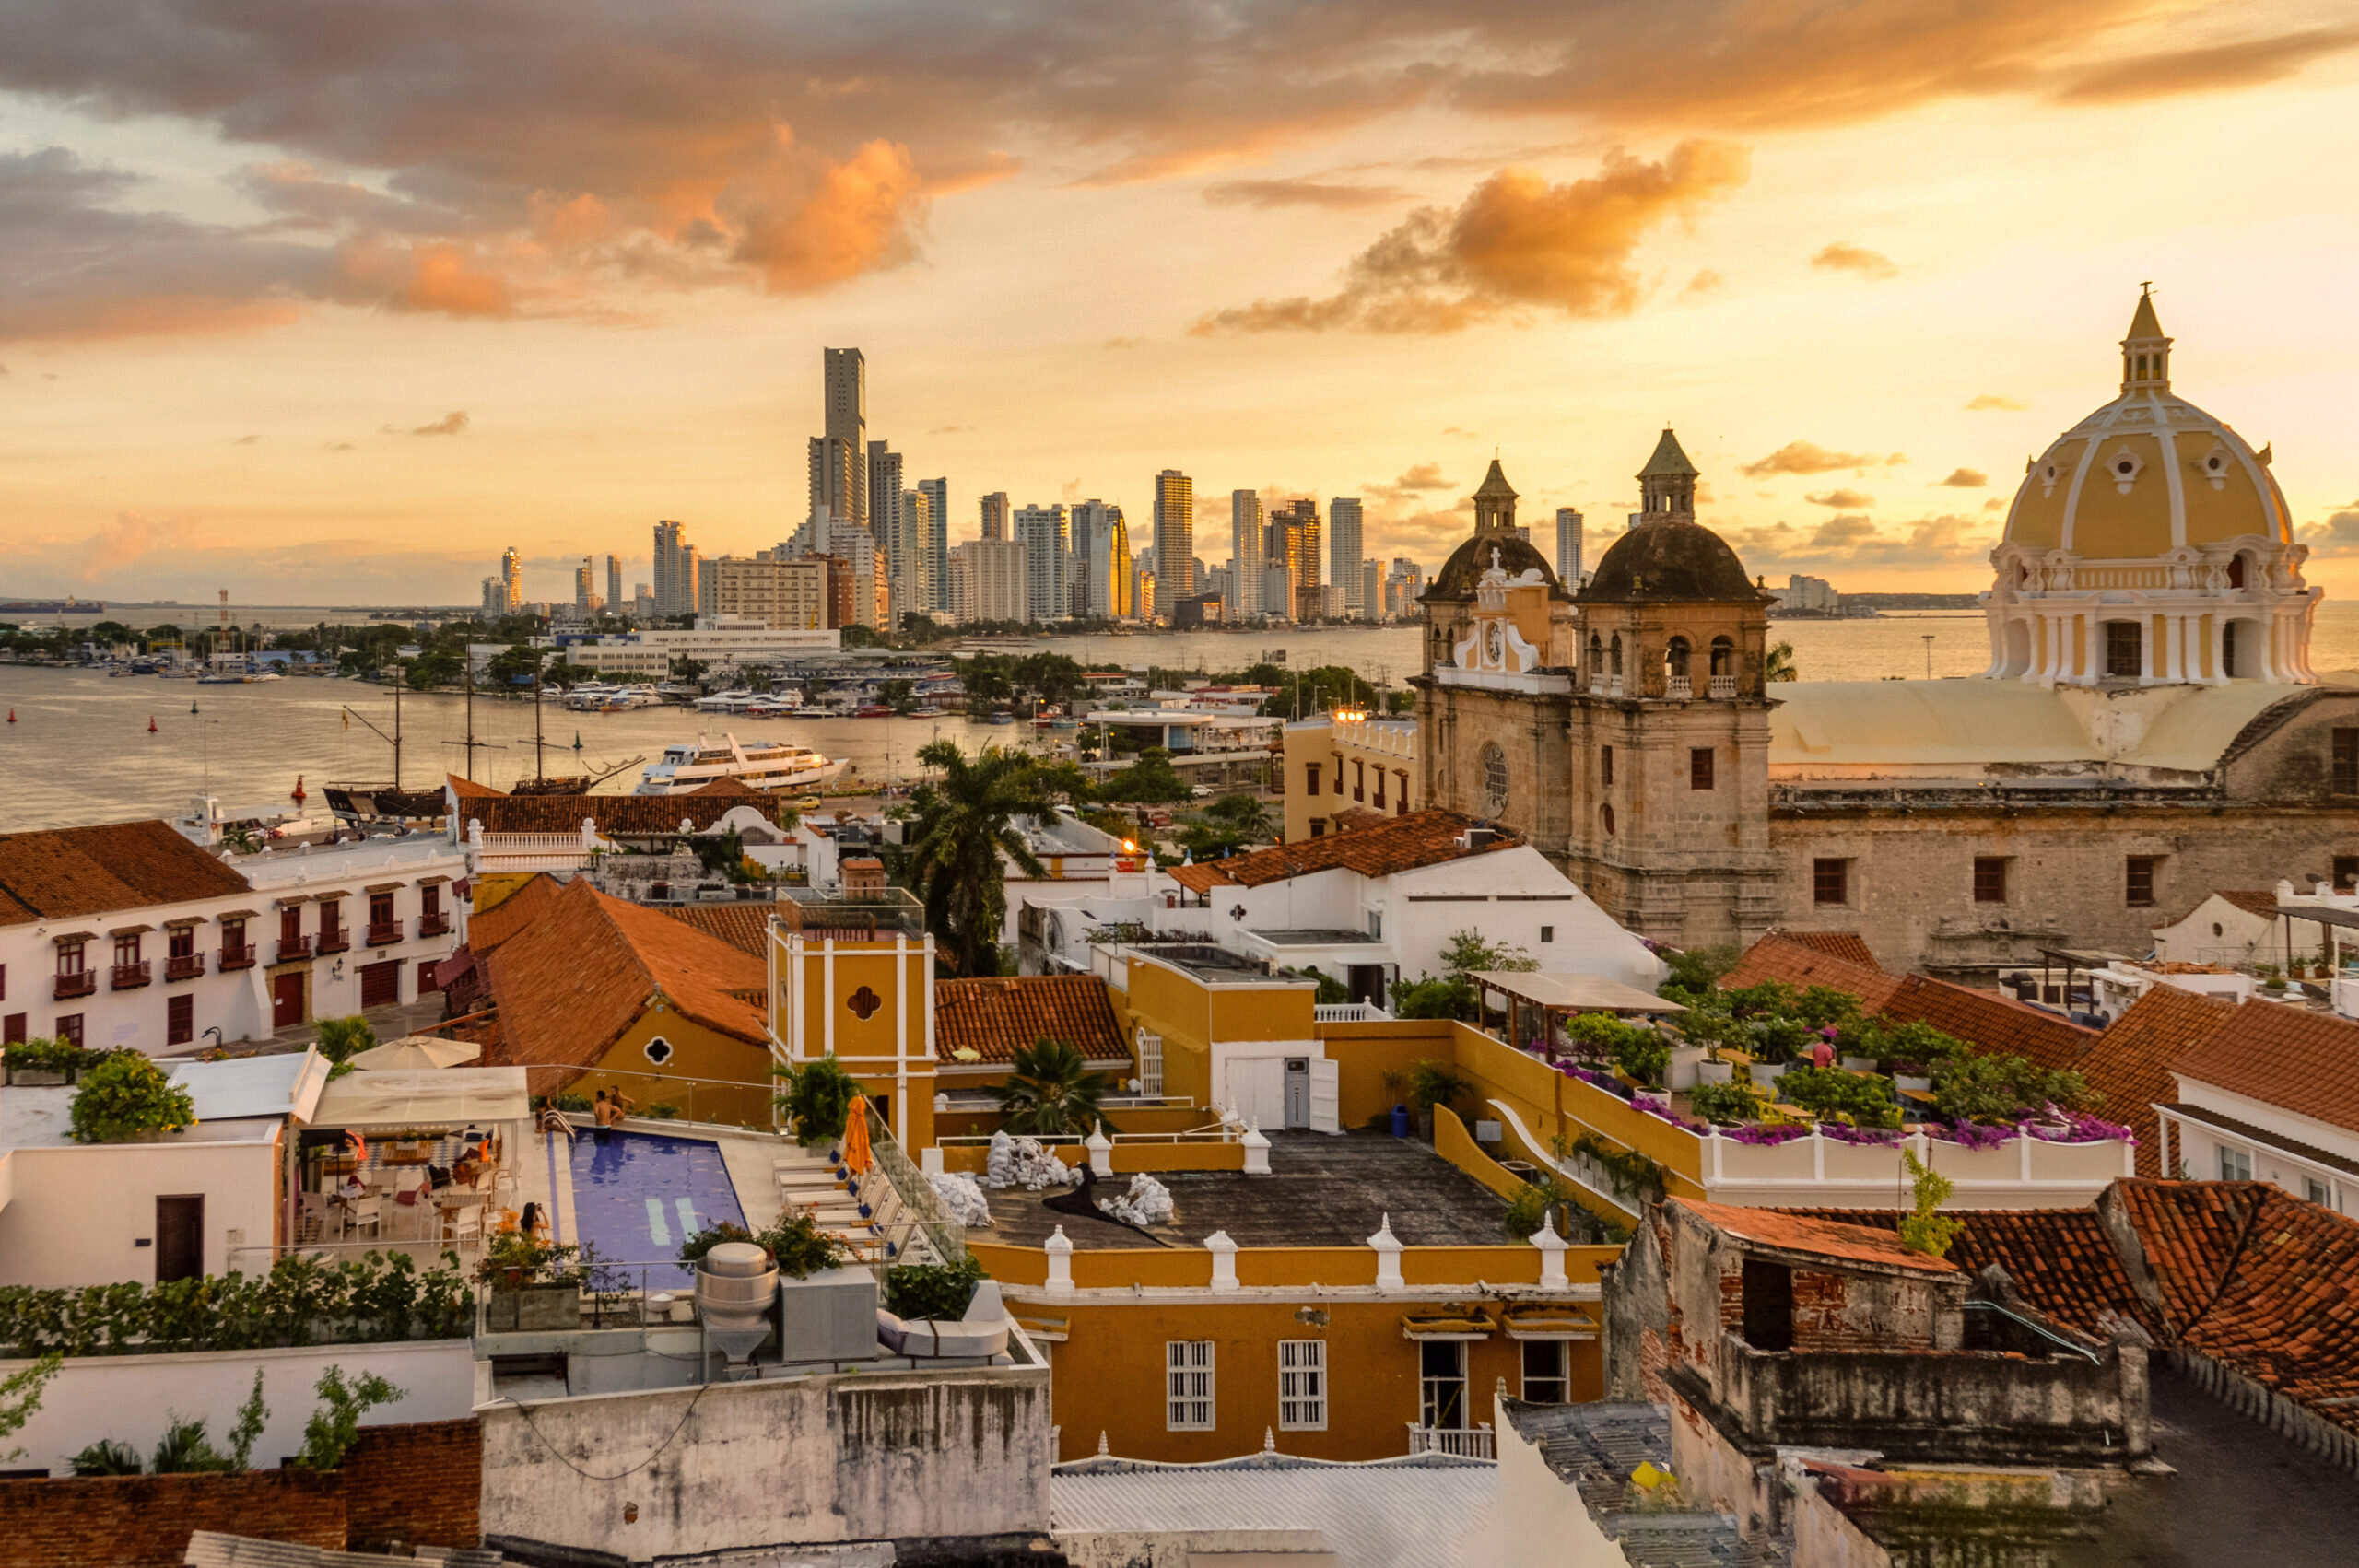 Decorative image of Cartagena Colombia Skyline At Sunset with old buildings and new buildings separated by a waterway